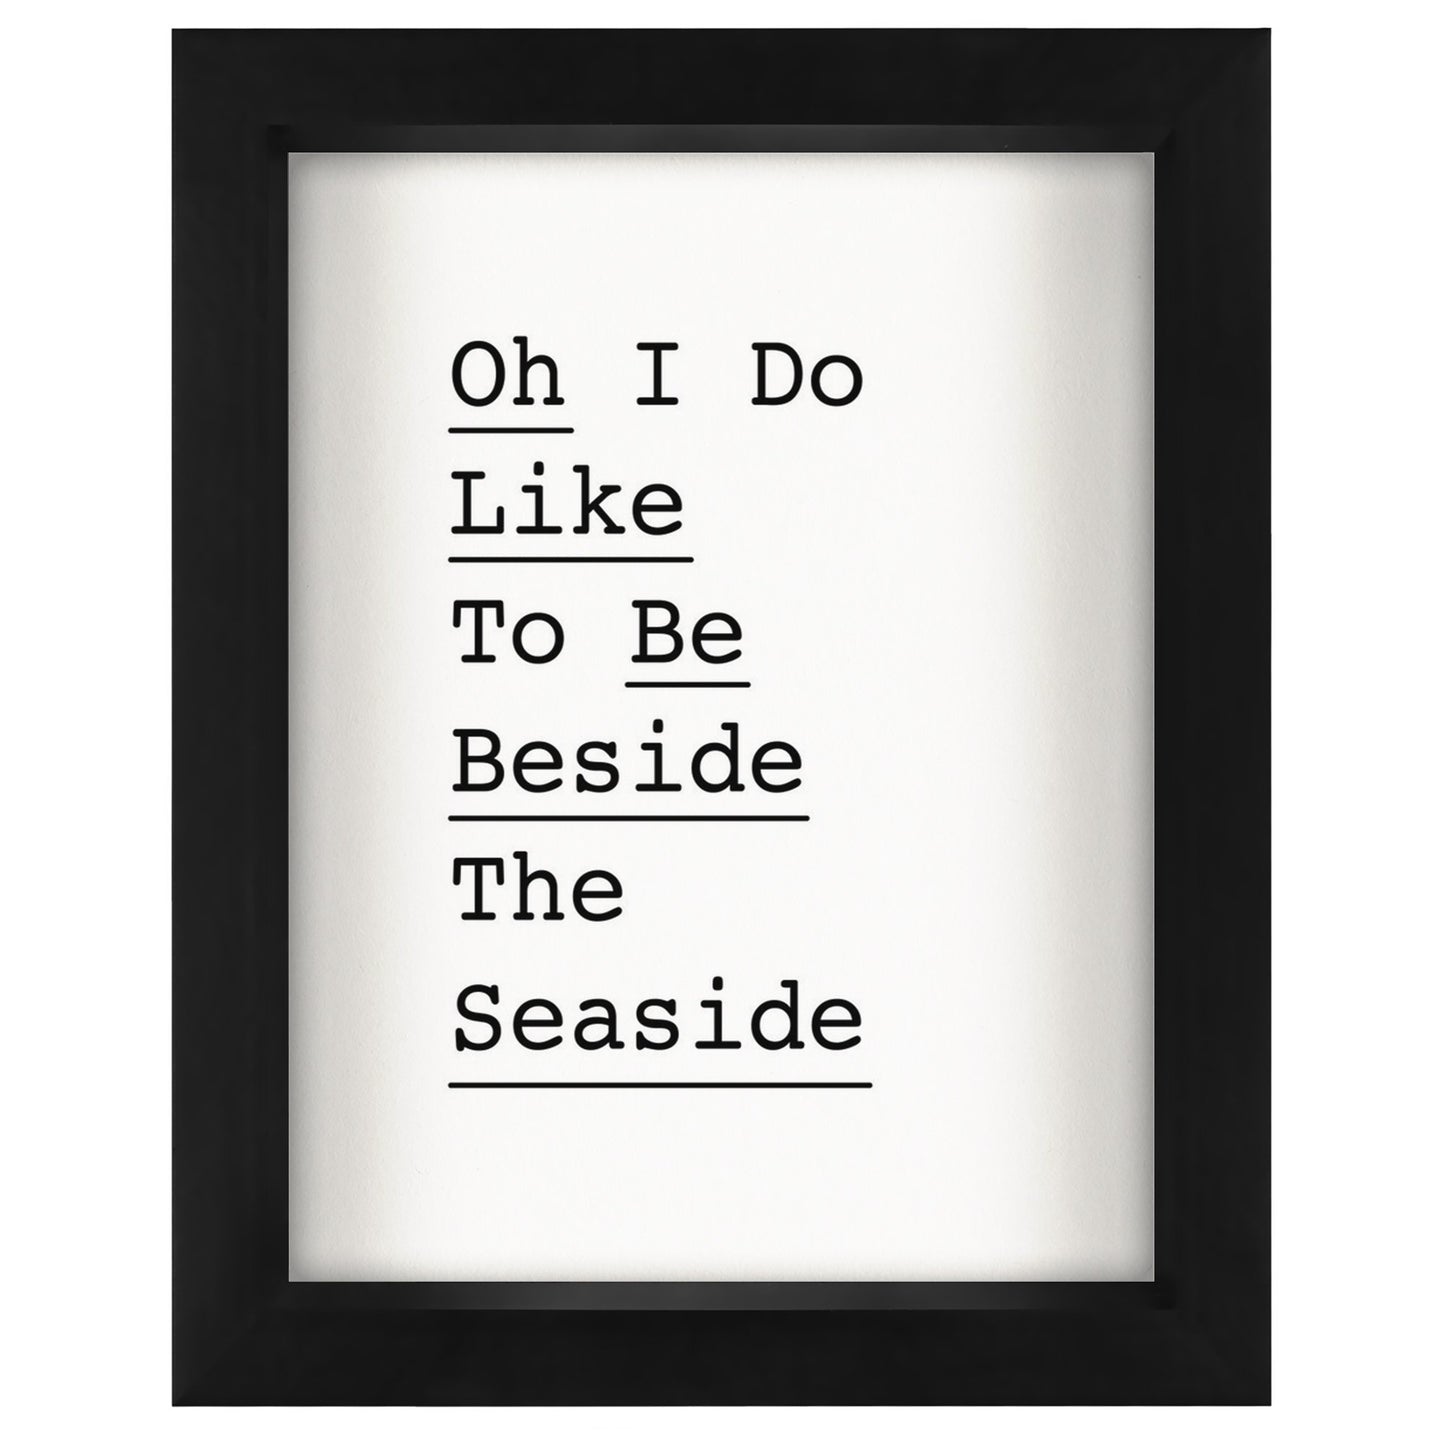 Oh I Do Like To Be Beside The Seaside 2 By Motivated Type - Shadow Box Framed Art - Americanflat